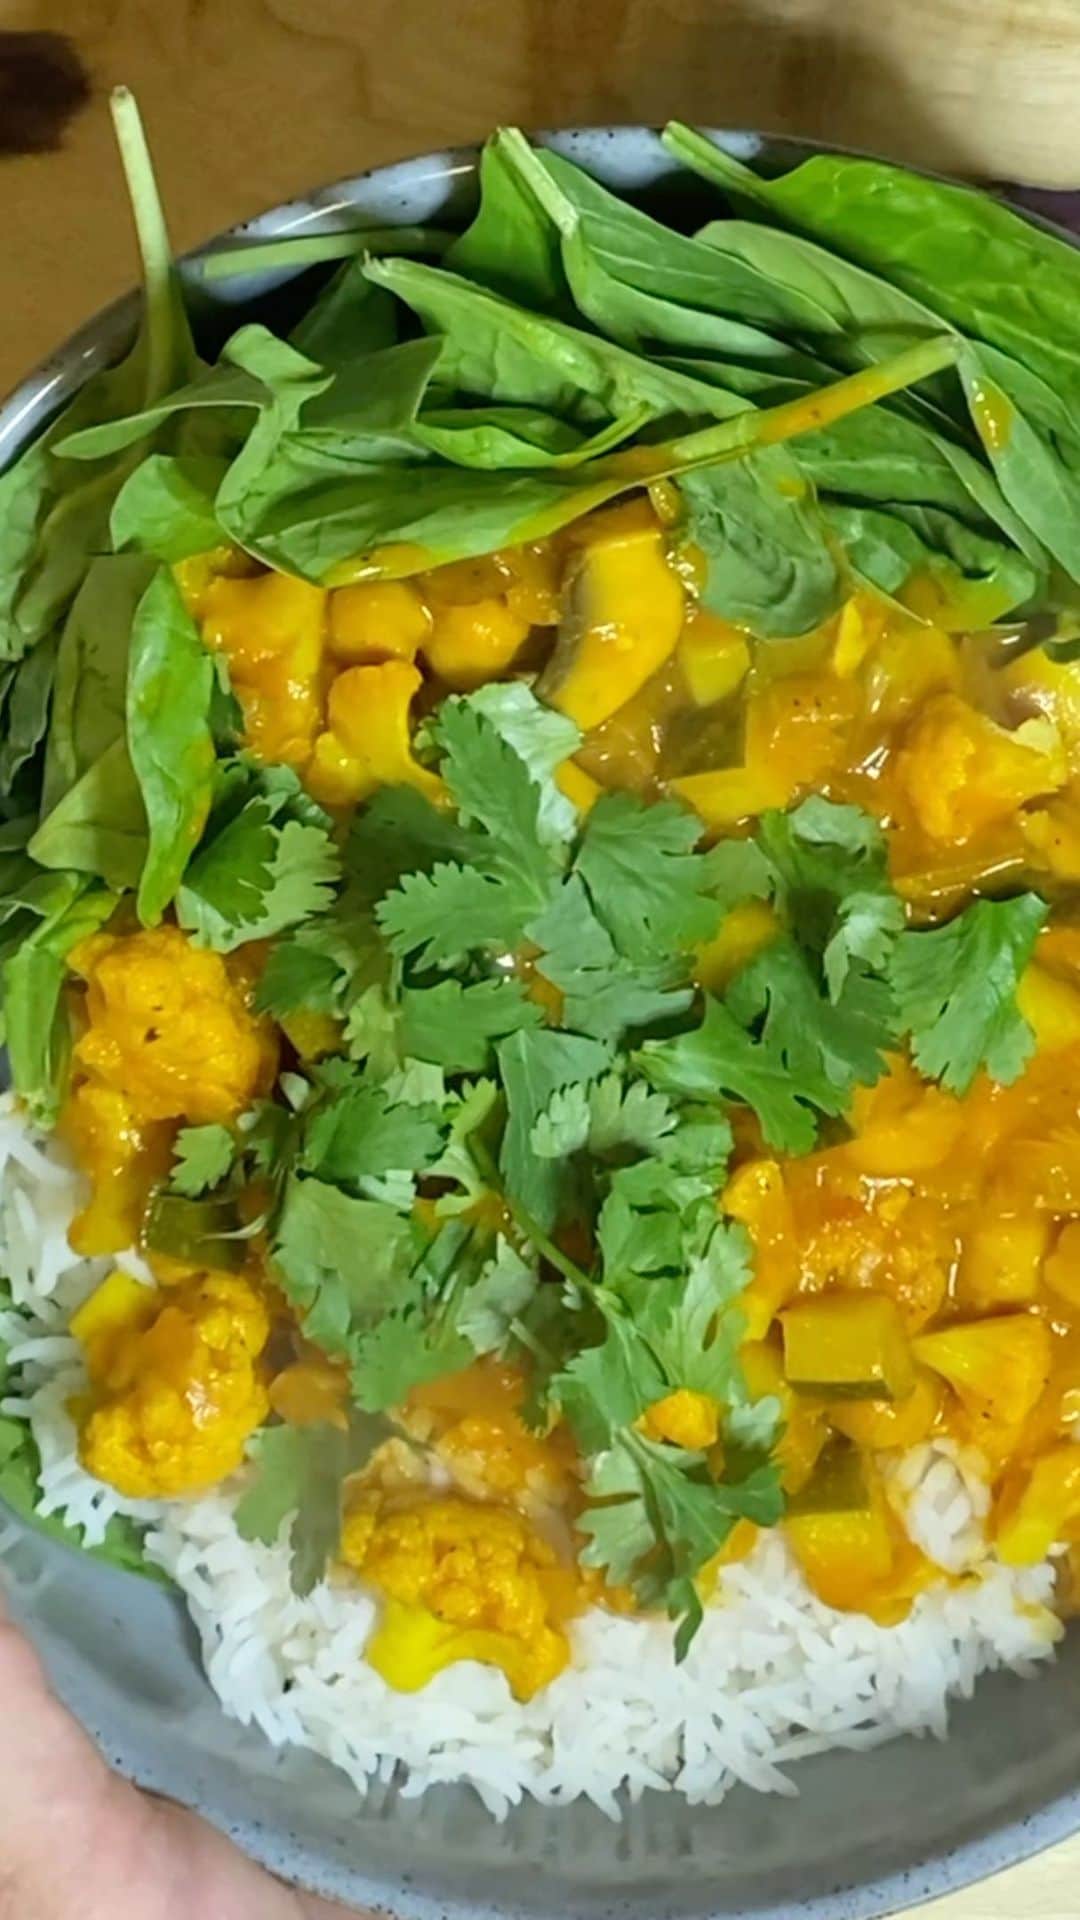 ginger and sproutのインスタグラム：「Super easy, crazy delish!  Ingredients 1 teaspoon Cumin  3-4 Garlic cloves minced 2 tablespoons Ginger minced 2 cups Onion small dice 1/2 cup Tomato Puree 1 teaspoon Turmeric Powder 3 tablespoons Curry Powder 1 tablespoon garam masala 1 teaspoon Red chilli flakes  Salt 2 taste 2cups Cauliflower Florets cut into 2 inch pieces  2 small zucchini large dice 1.5 cup mushrooms large dice 1 can cups Chickpeas  2 cans Coconut Milk」